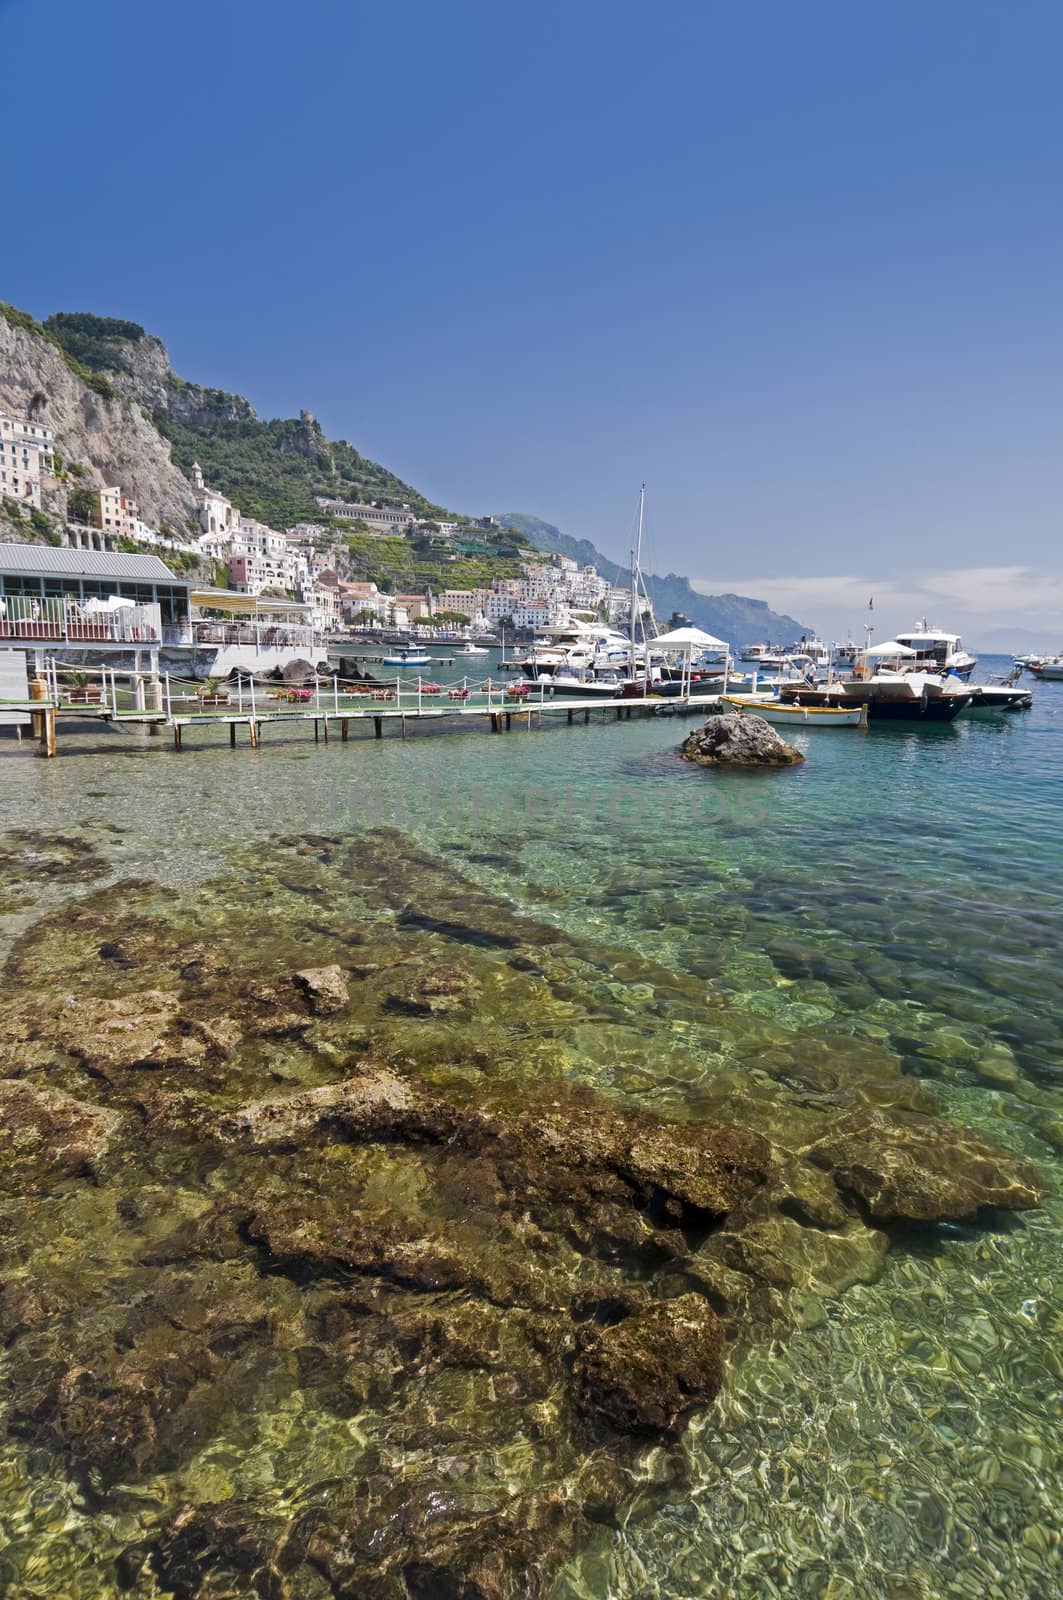 Amalfi Coast, transparent water in the harbor with boat. Naples - Best of Italy